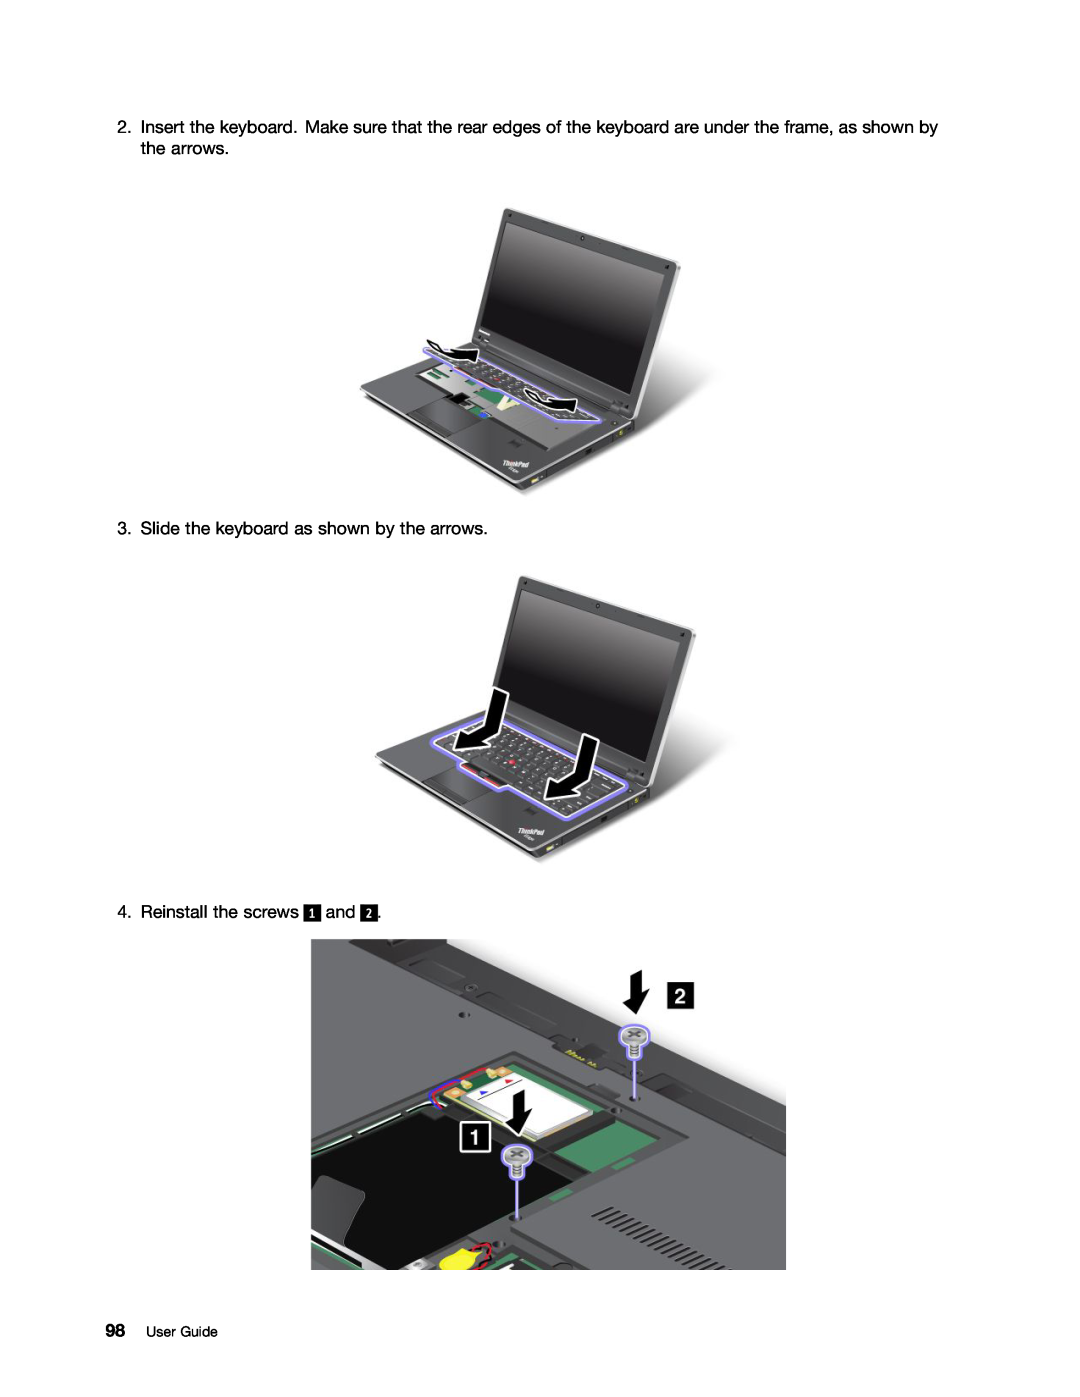 Lenovo 114155U, E520, E420 manual Slide the keyboard as shown by the arrows, Reinstall the screws, User Guide 